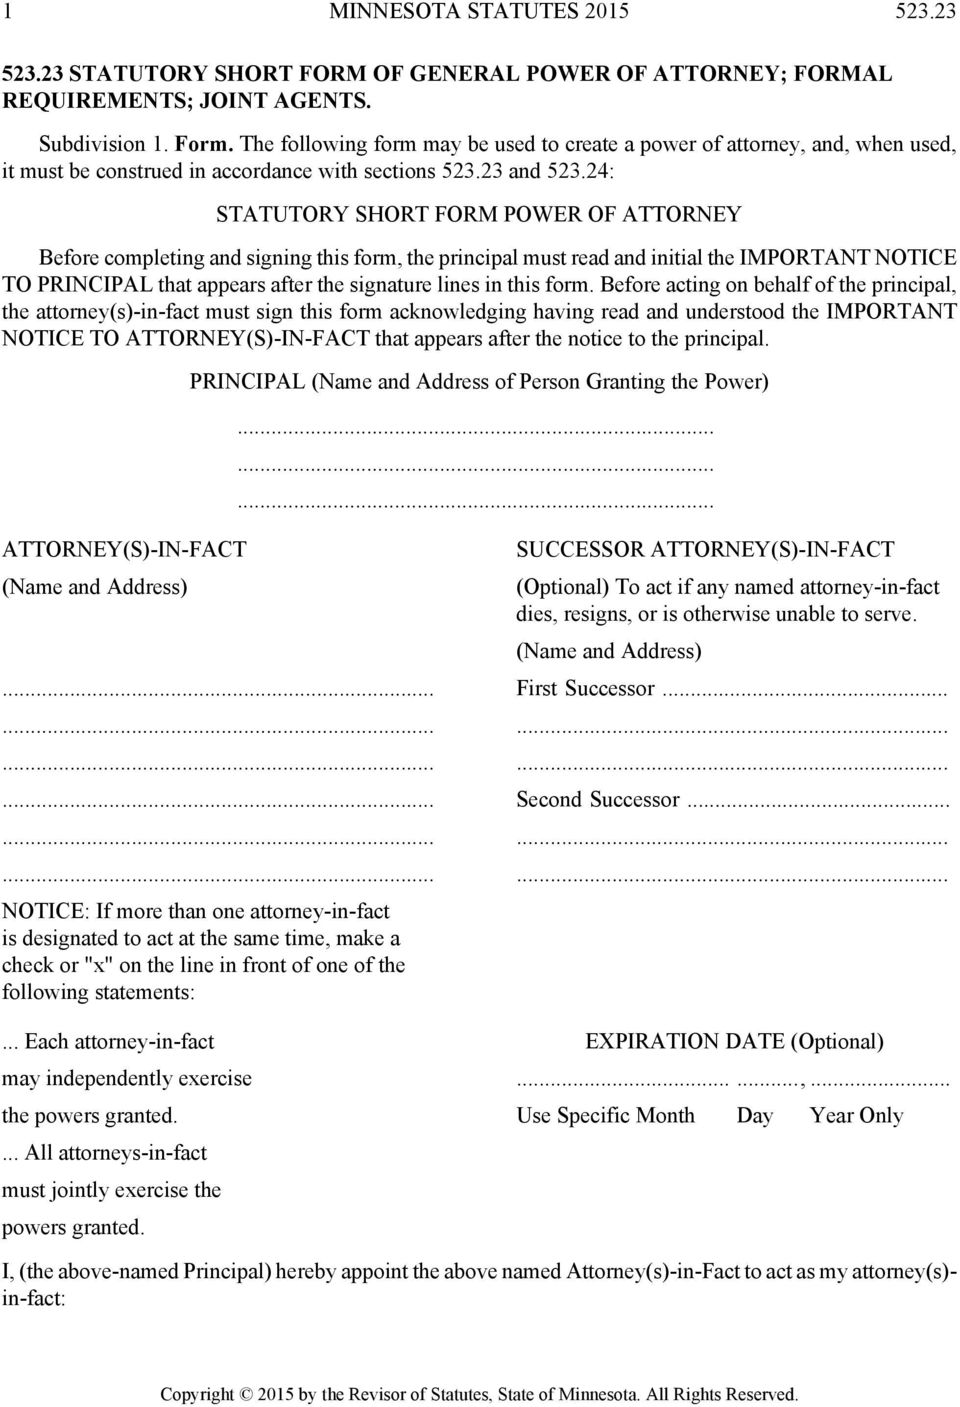 24: STATUTORY SHORT FORM POWER OF ATTORNEY Before completing and signing this form, the principal must read and initial the IMPORTANT NOTICE TO PRINCIPAL that appears after the signature lines in